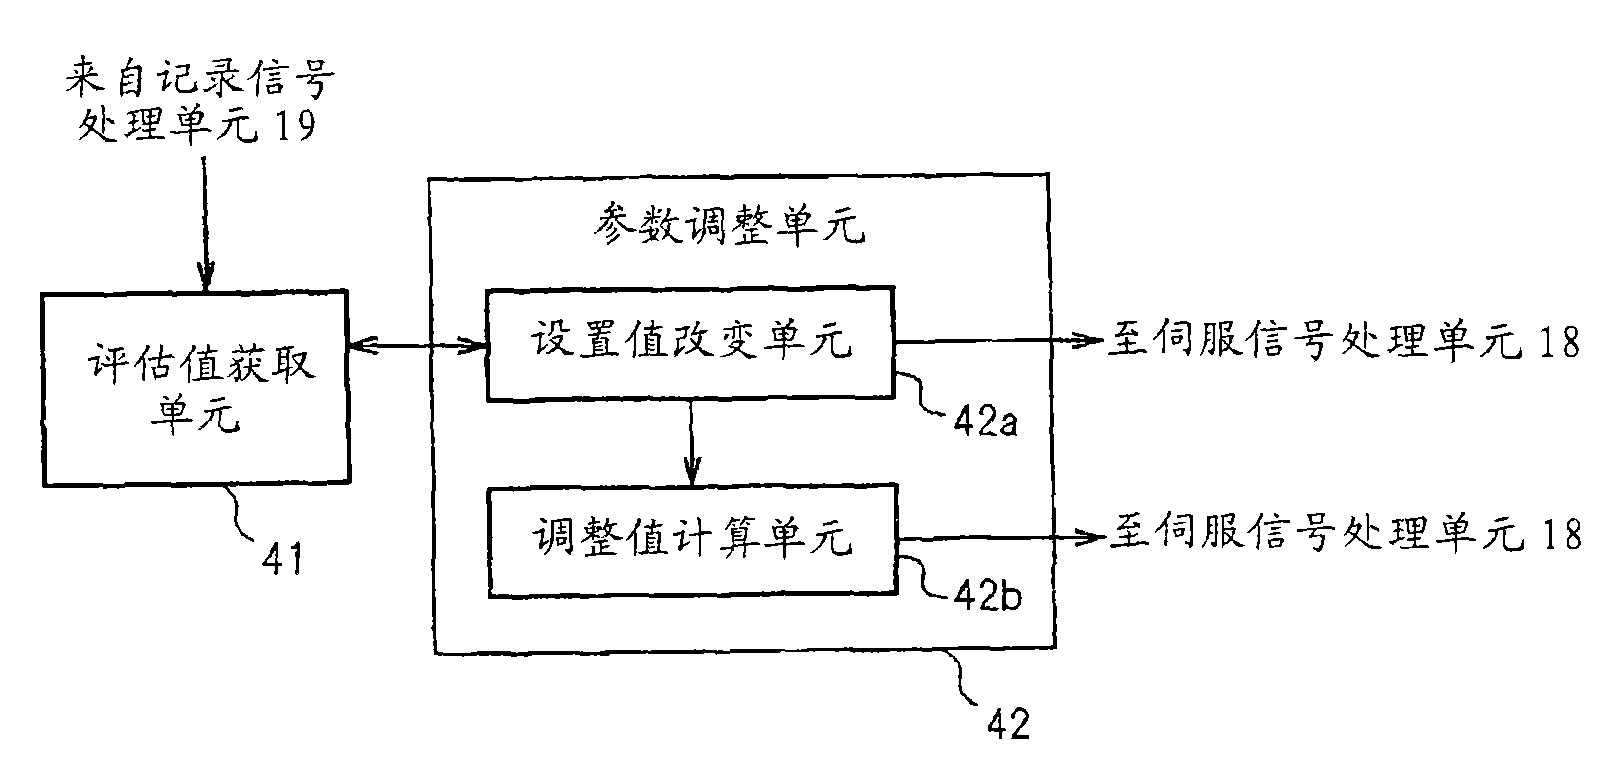 Optical disc apparatus, method of controlling the same, and information storage medium